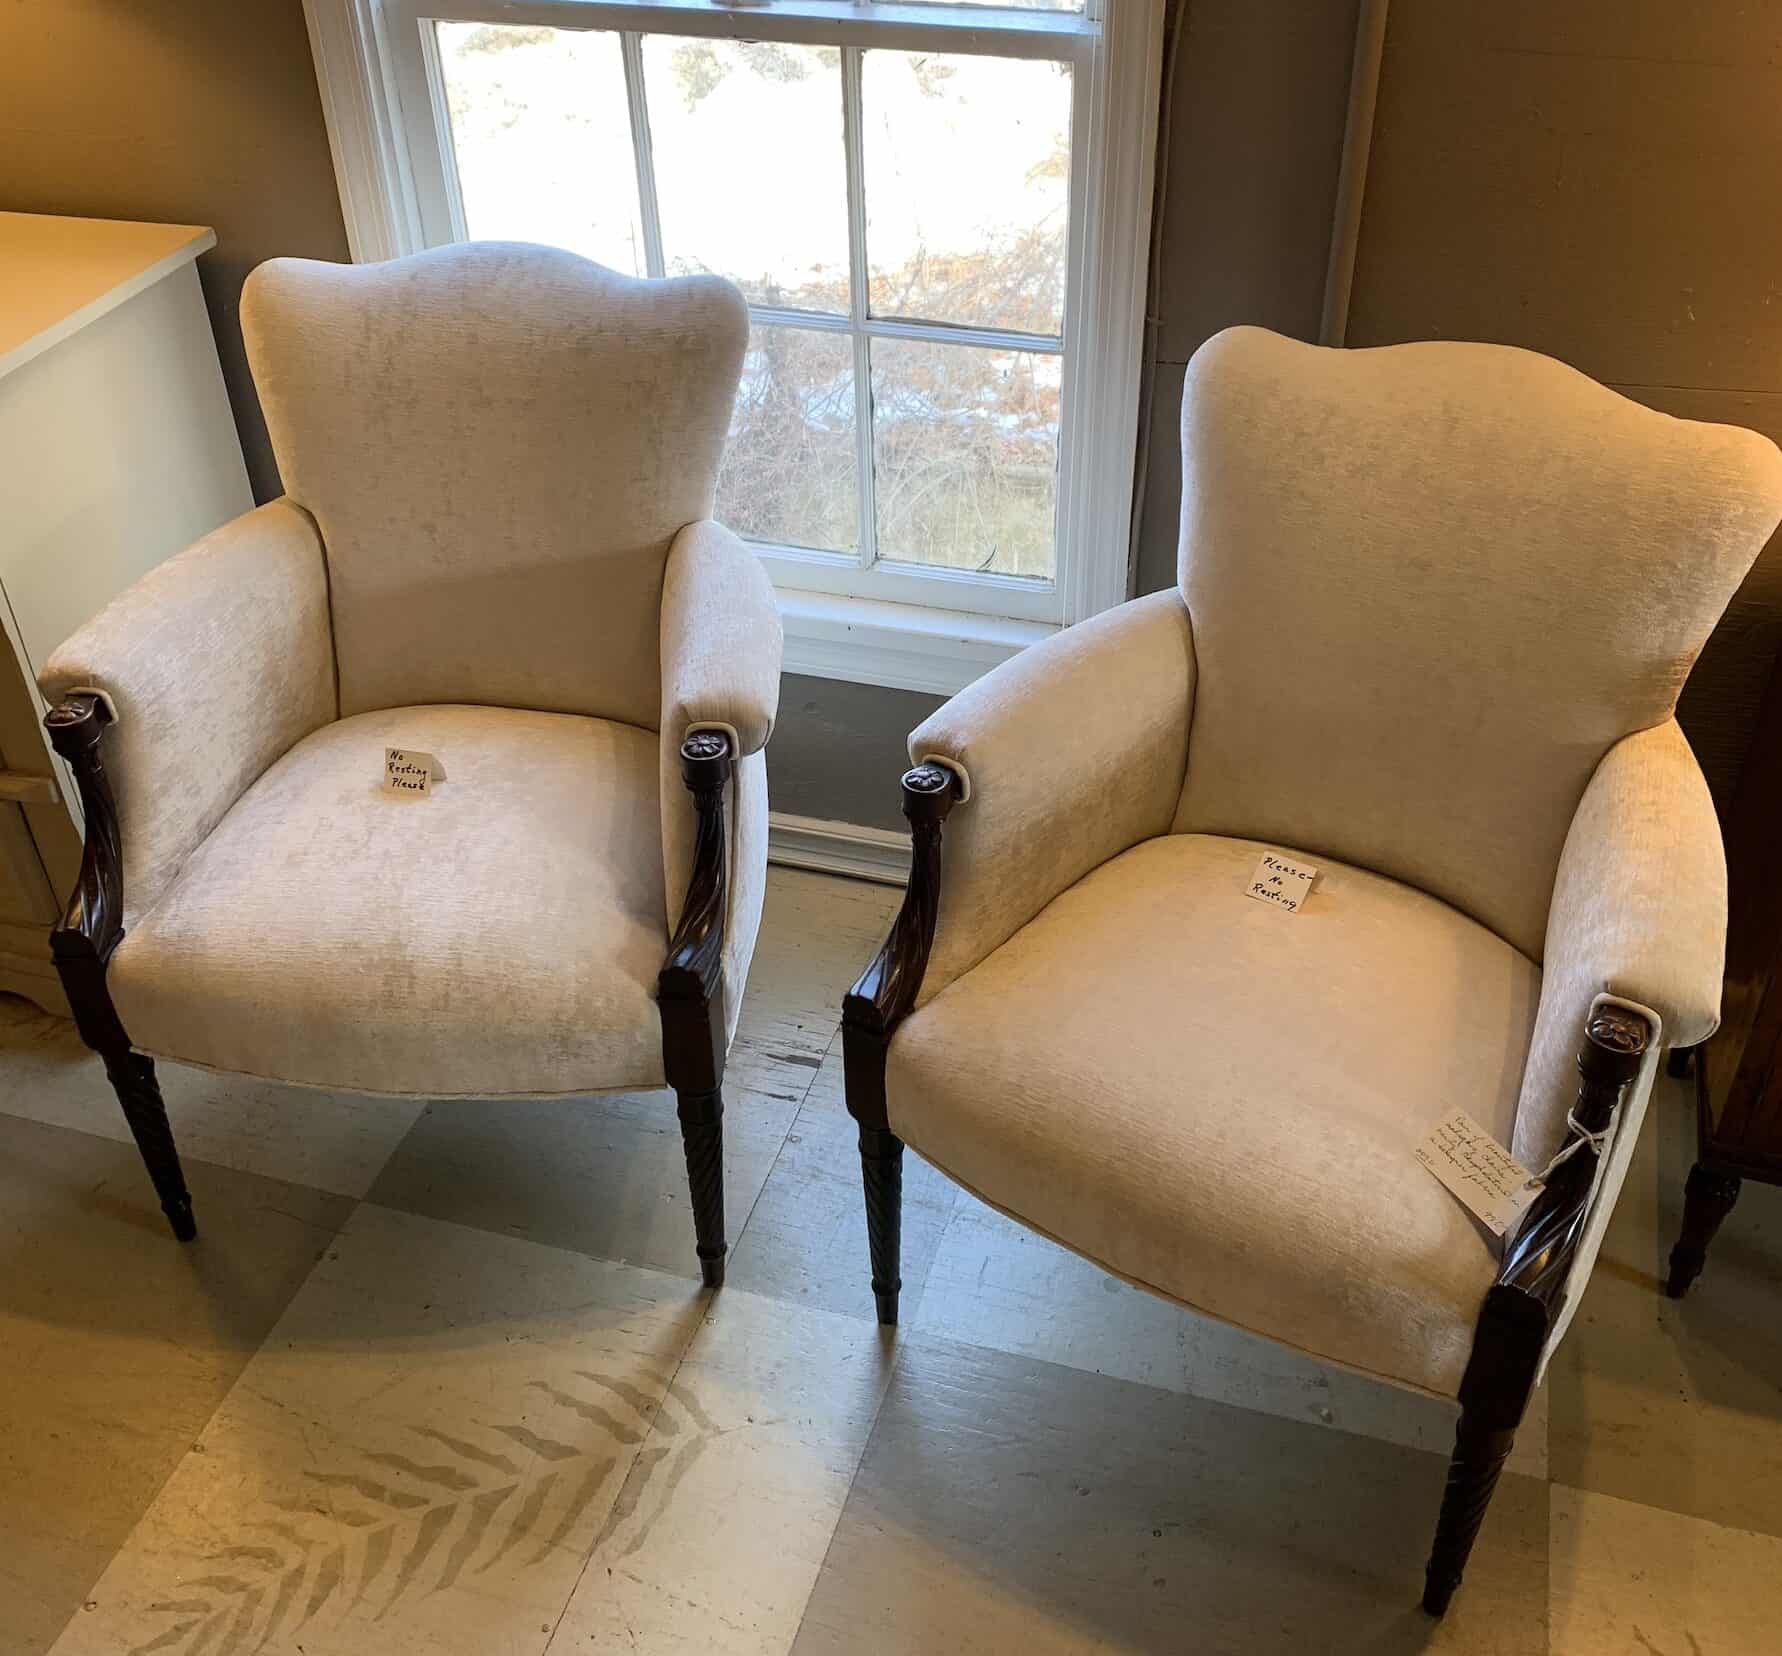 blush-upholstered-chairs